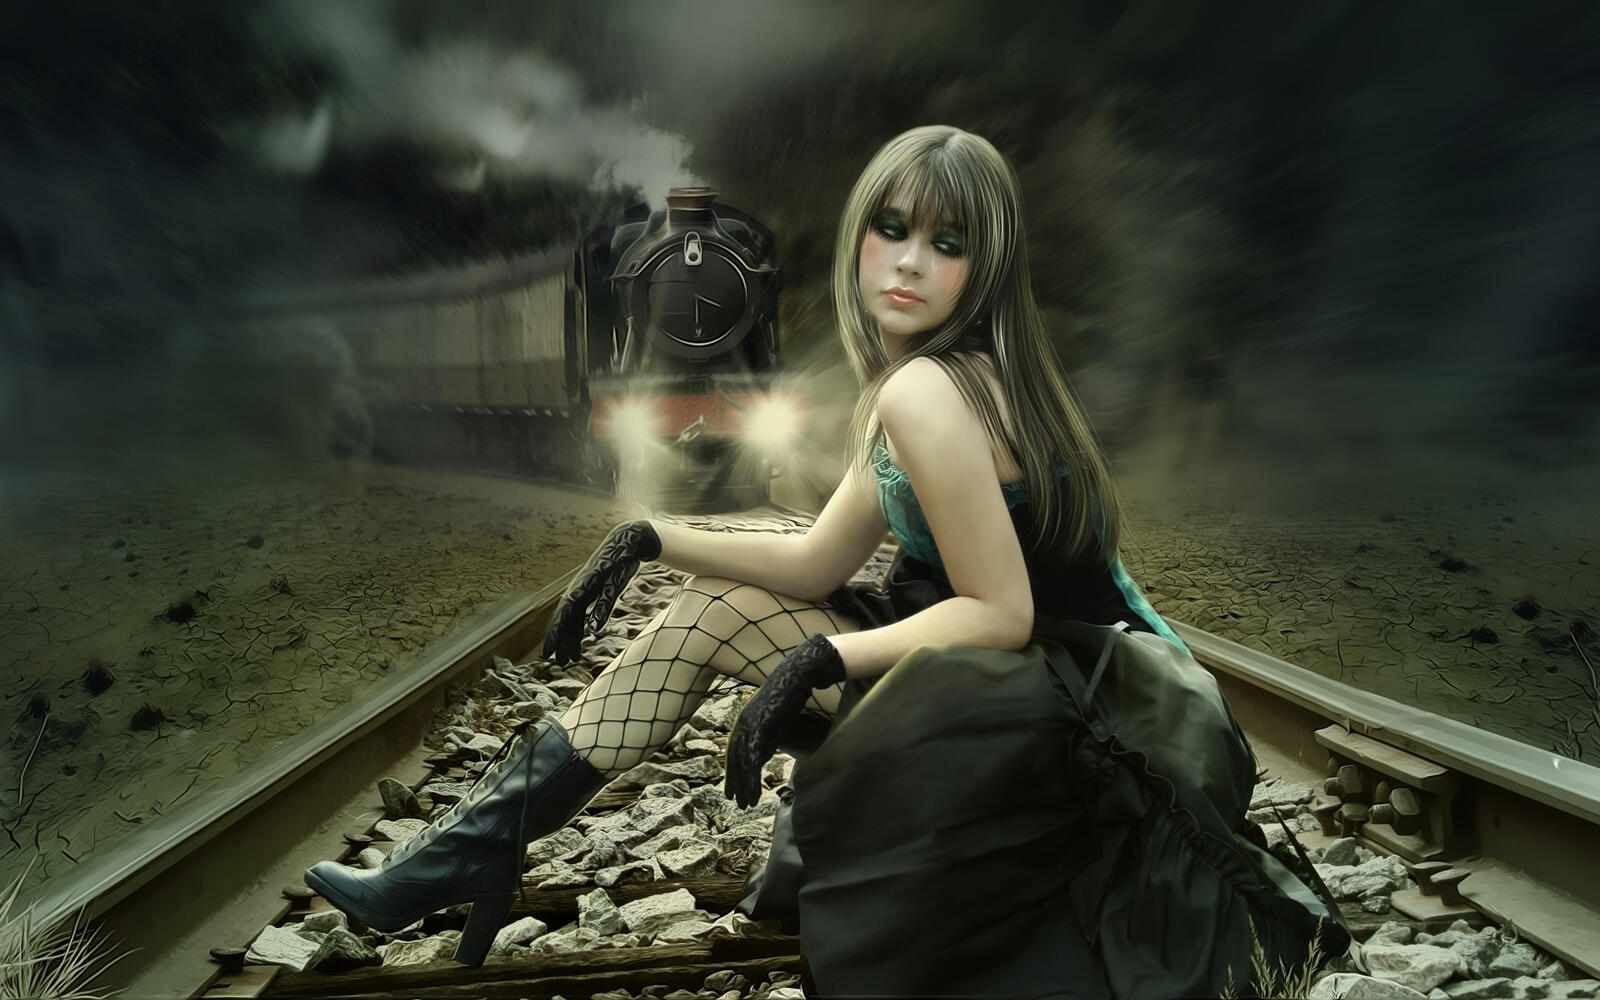 Free photo Fantasy girl sitting on the tracks with an approaching train